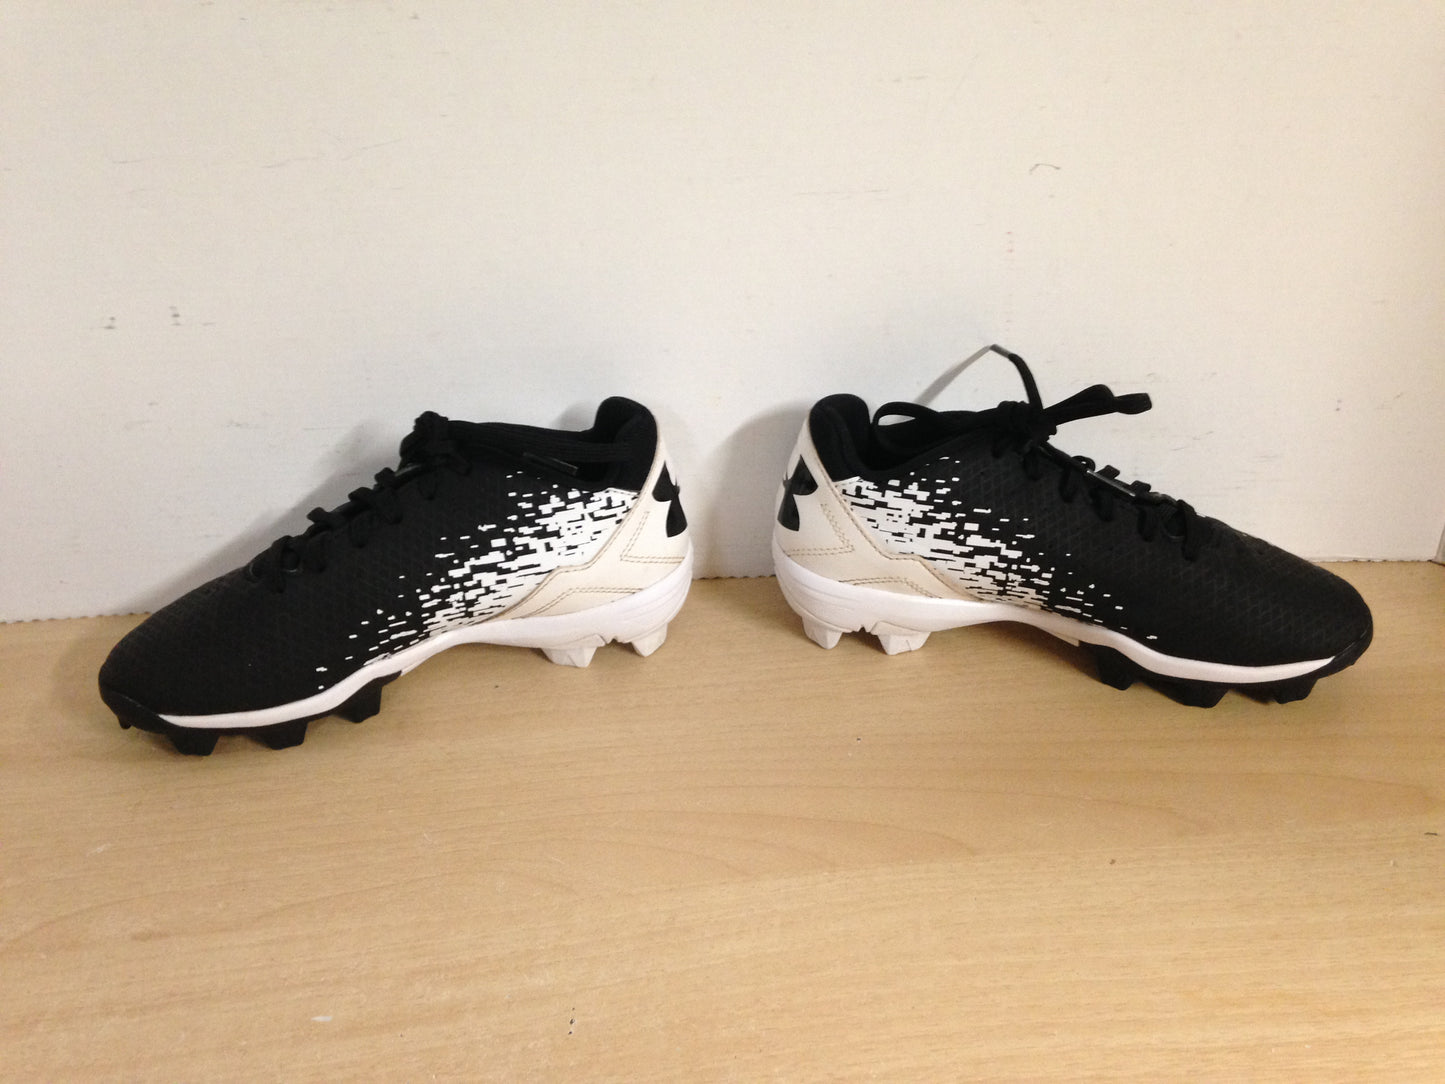 Baseball Shoes Cleats Child Size 1 Under Armour  Black White